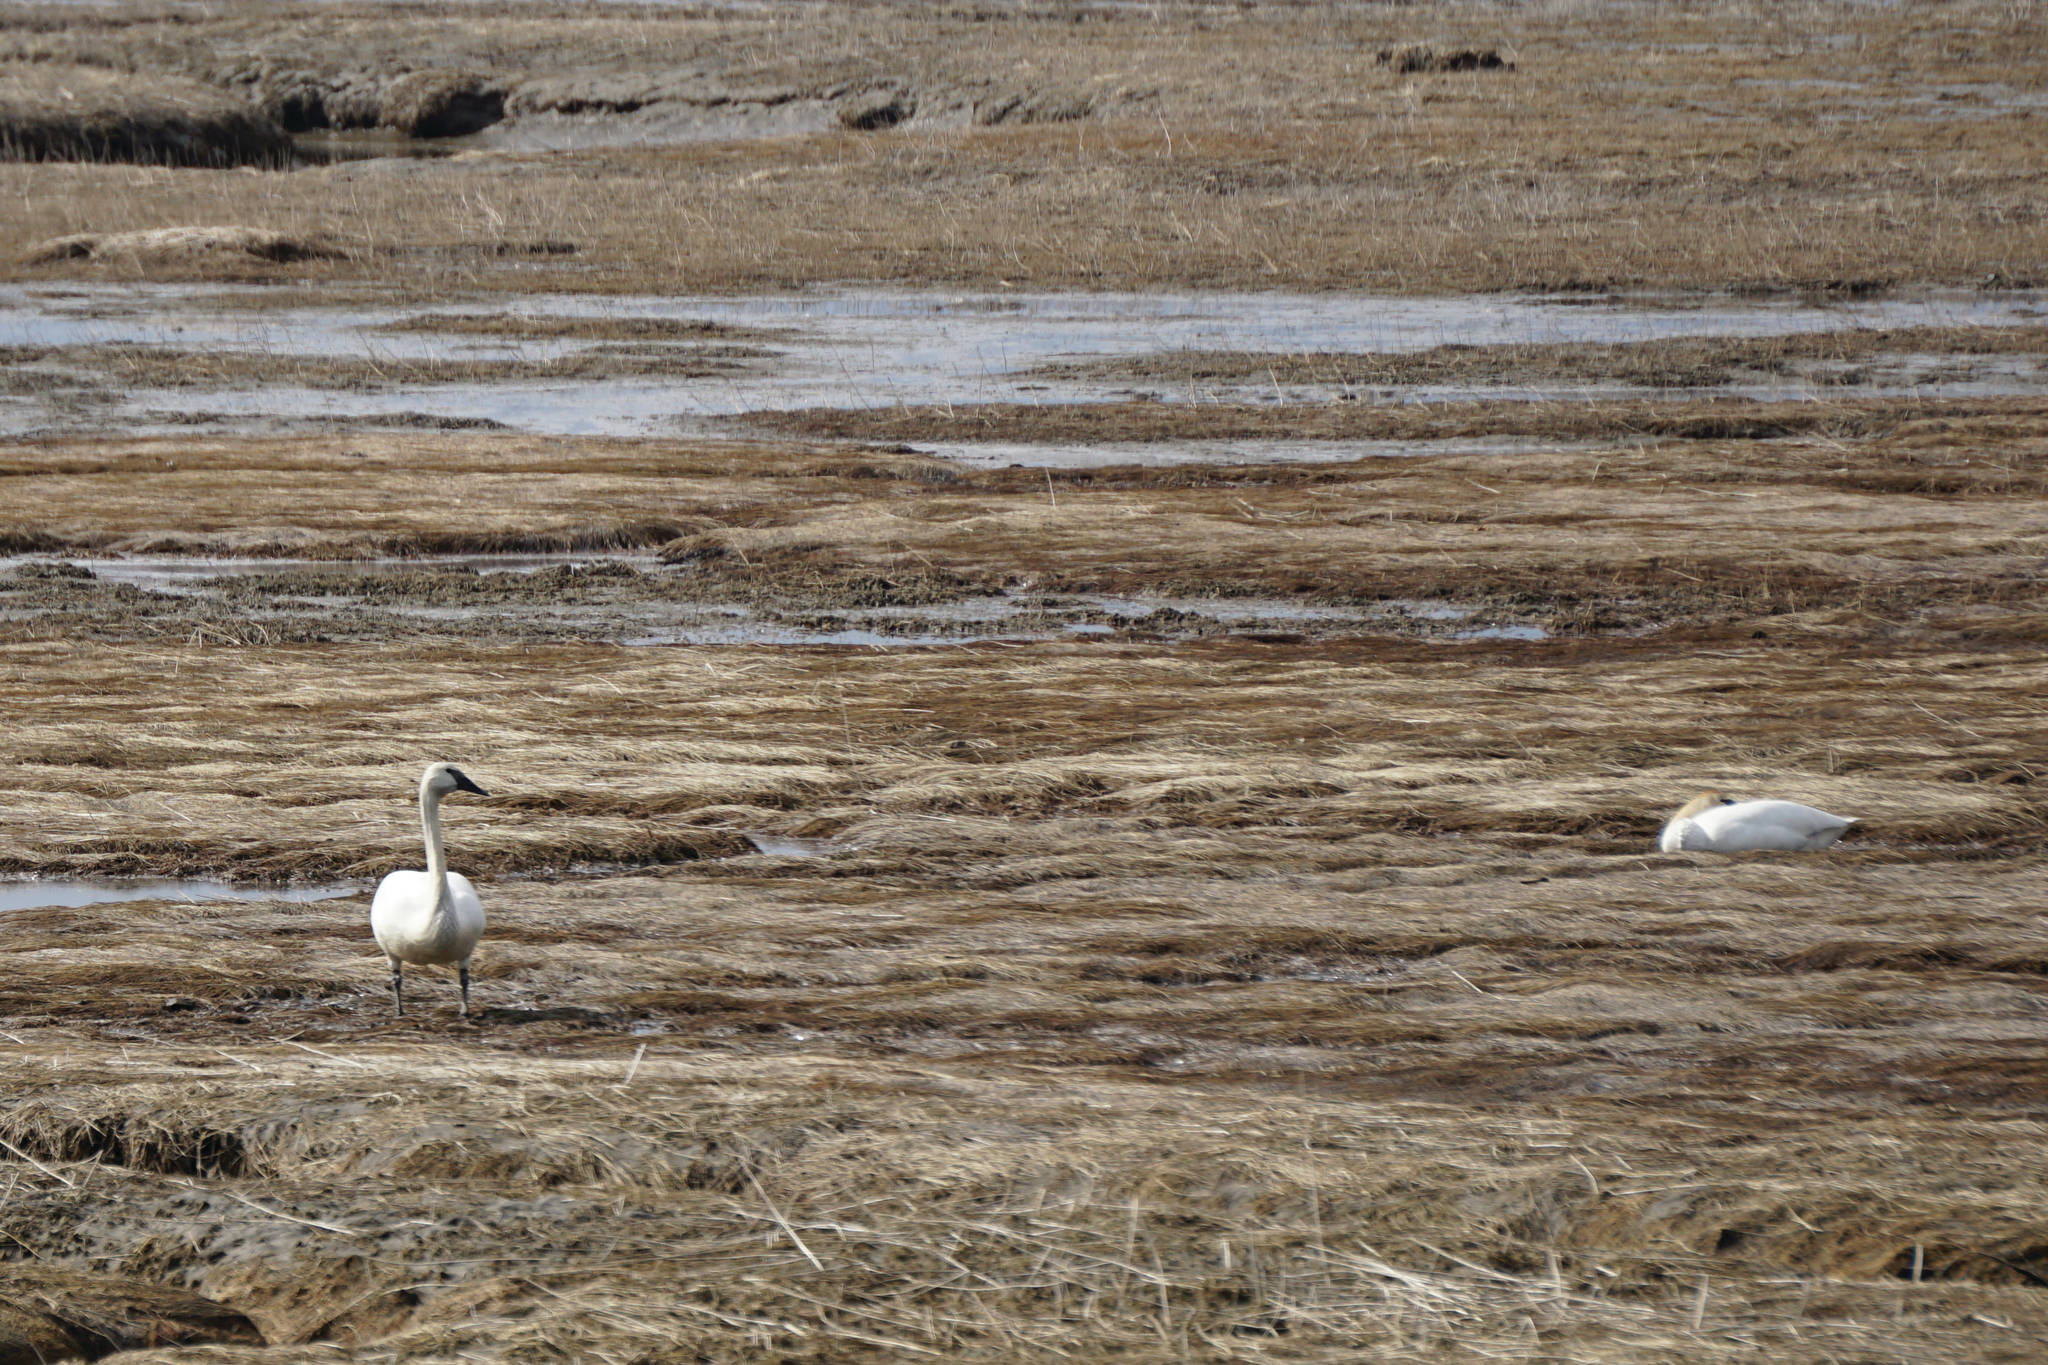 A pair of trumpeter swans feed in Beluga Slough on Monday, April 12, 2021, in Homer, Alaska. According to local birders, both tundra and trumpeter swans have been seen in the area the past week. (Photo by Michael Armstrong/Homer News)